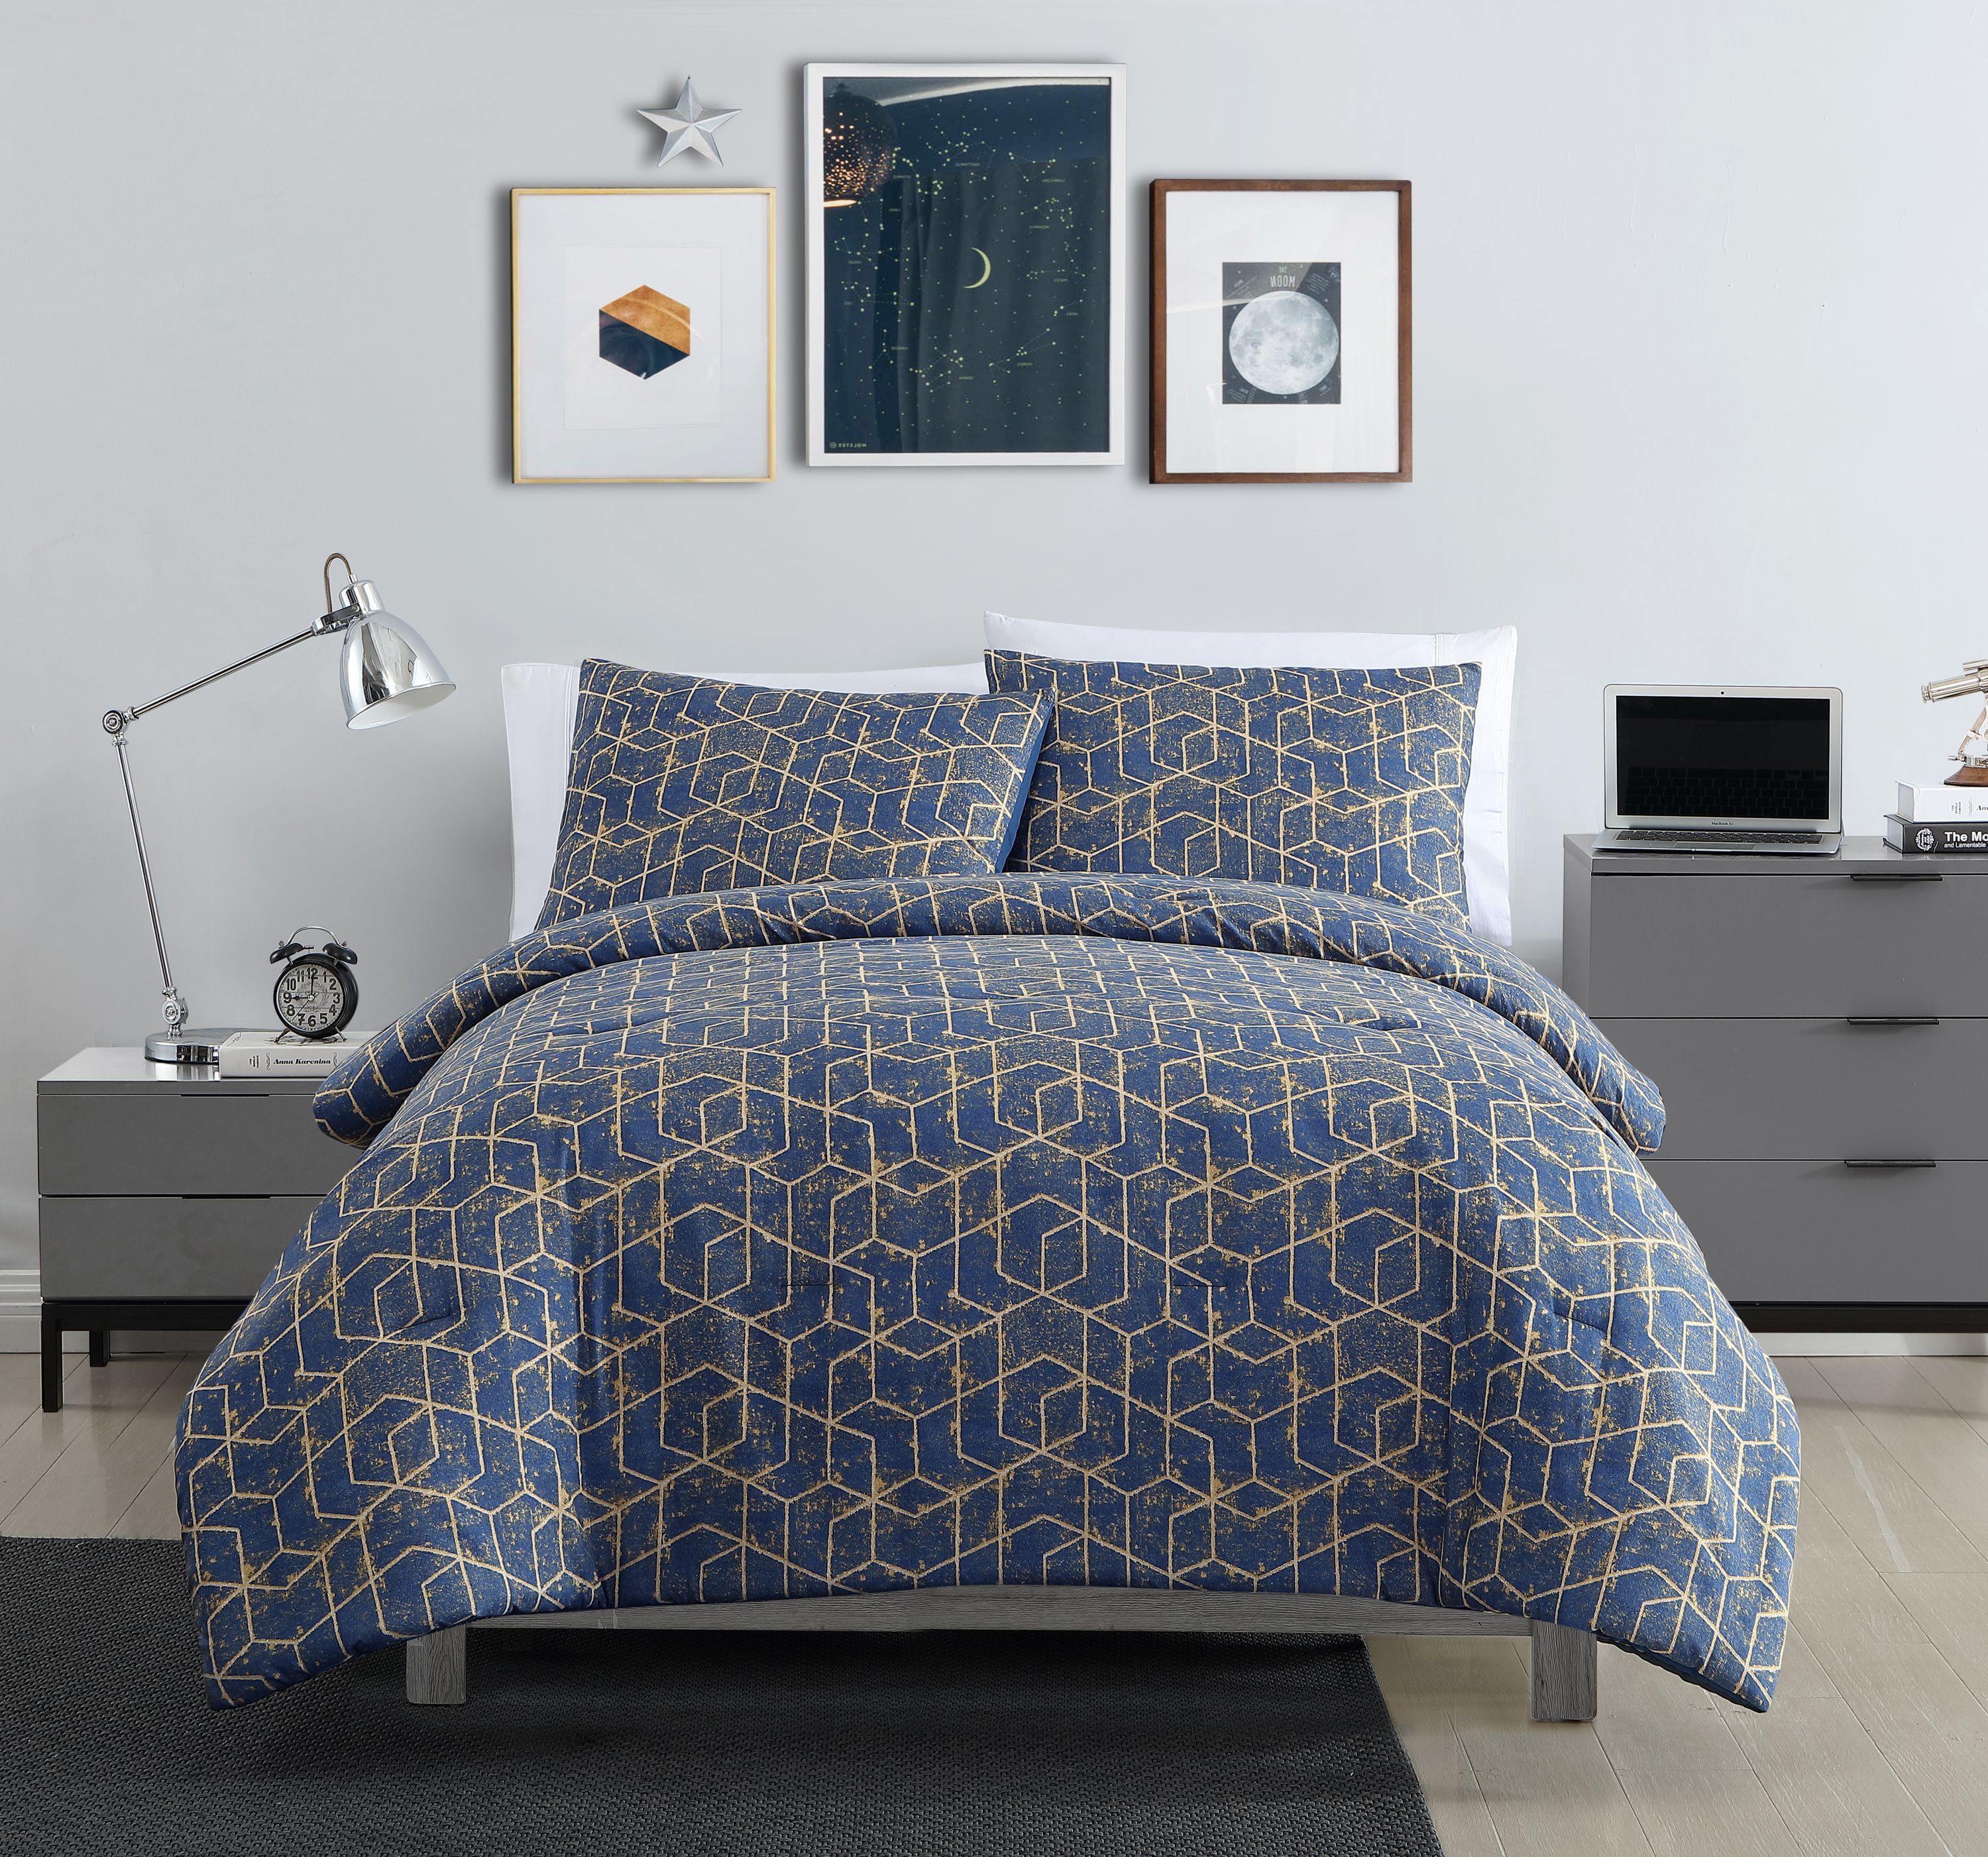 Ironclad Geometric Gold Duvet Cover, Grey And Gold Duvet Cover